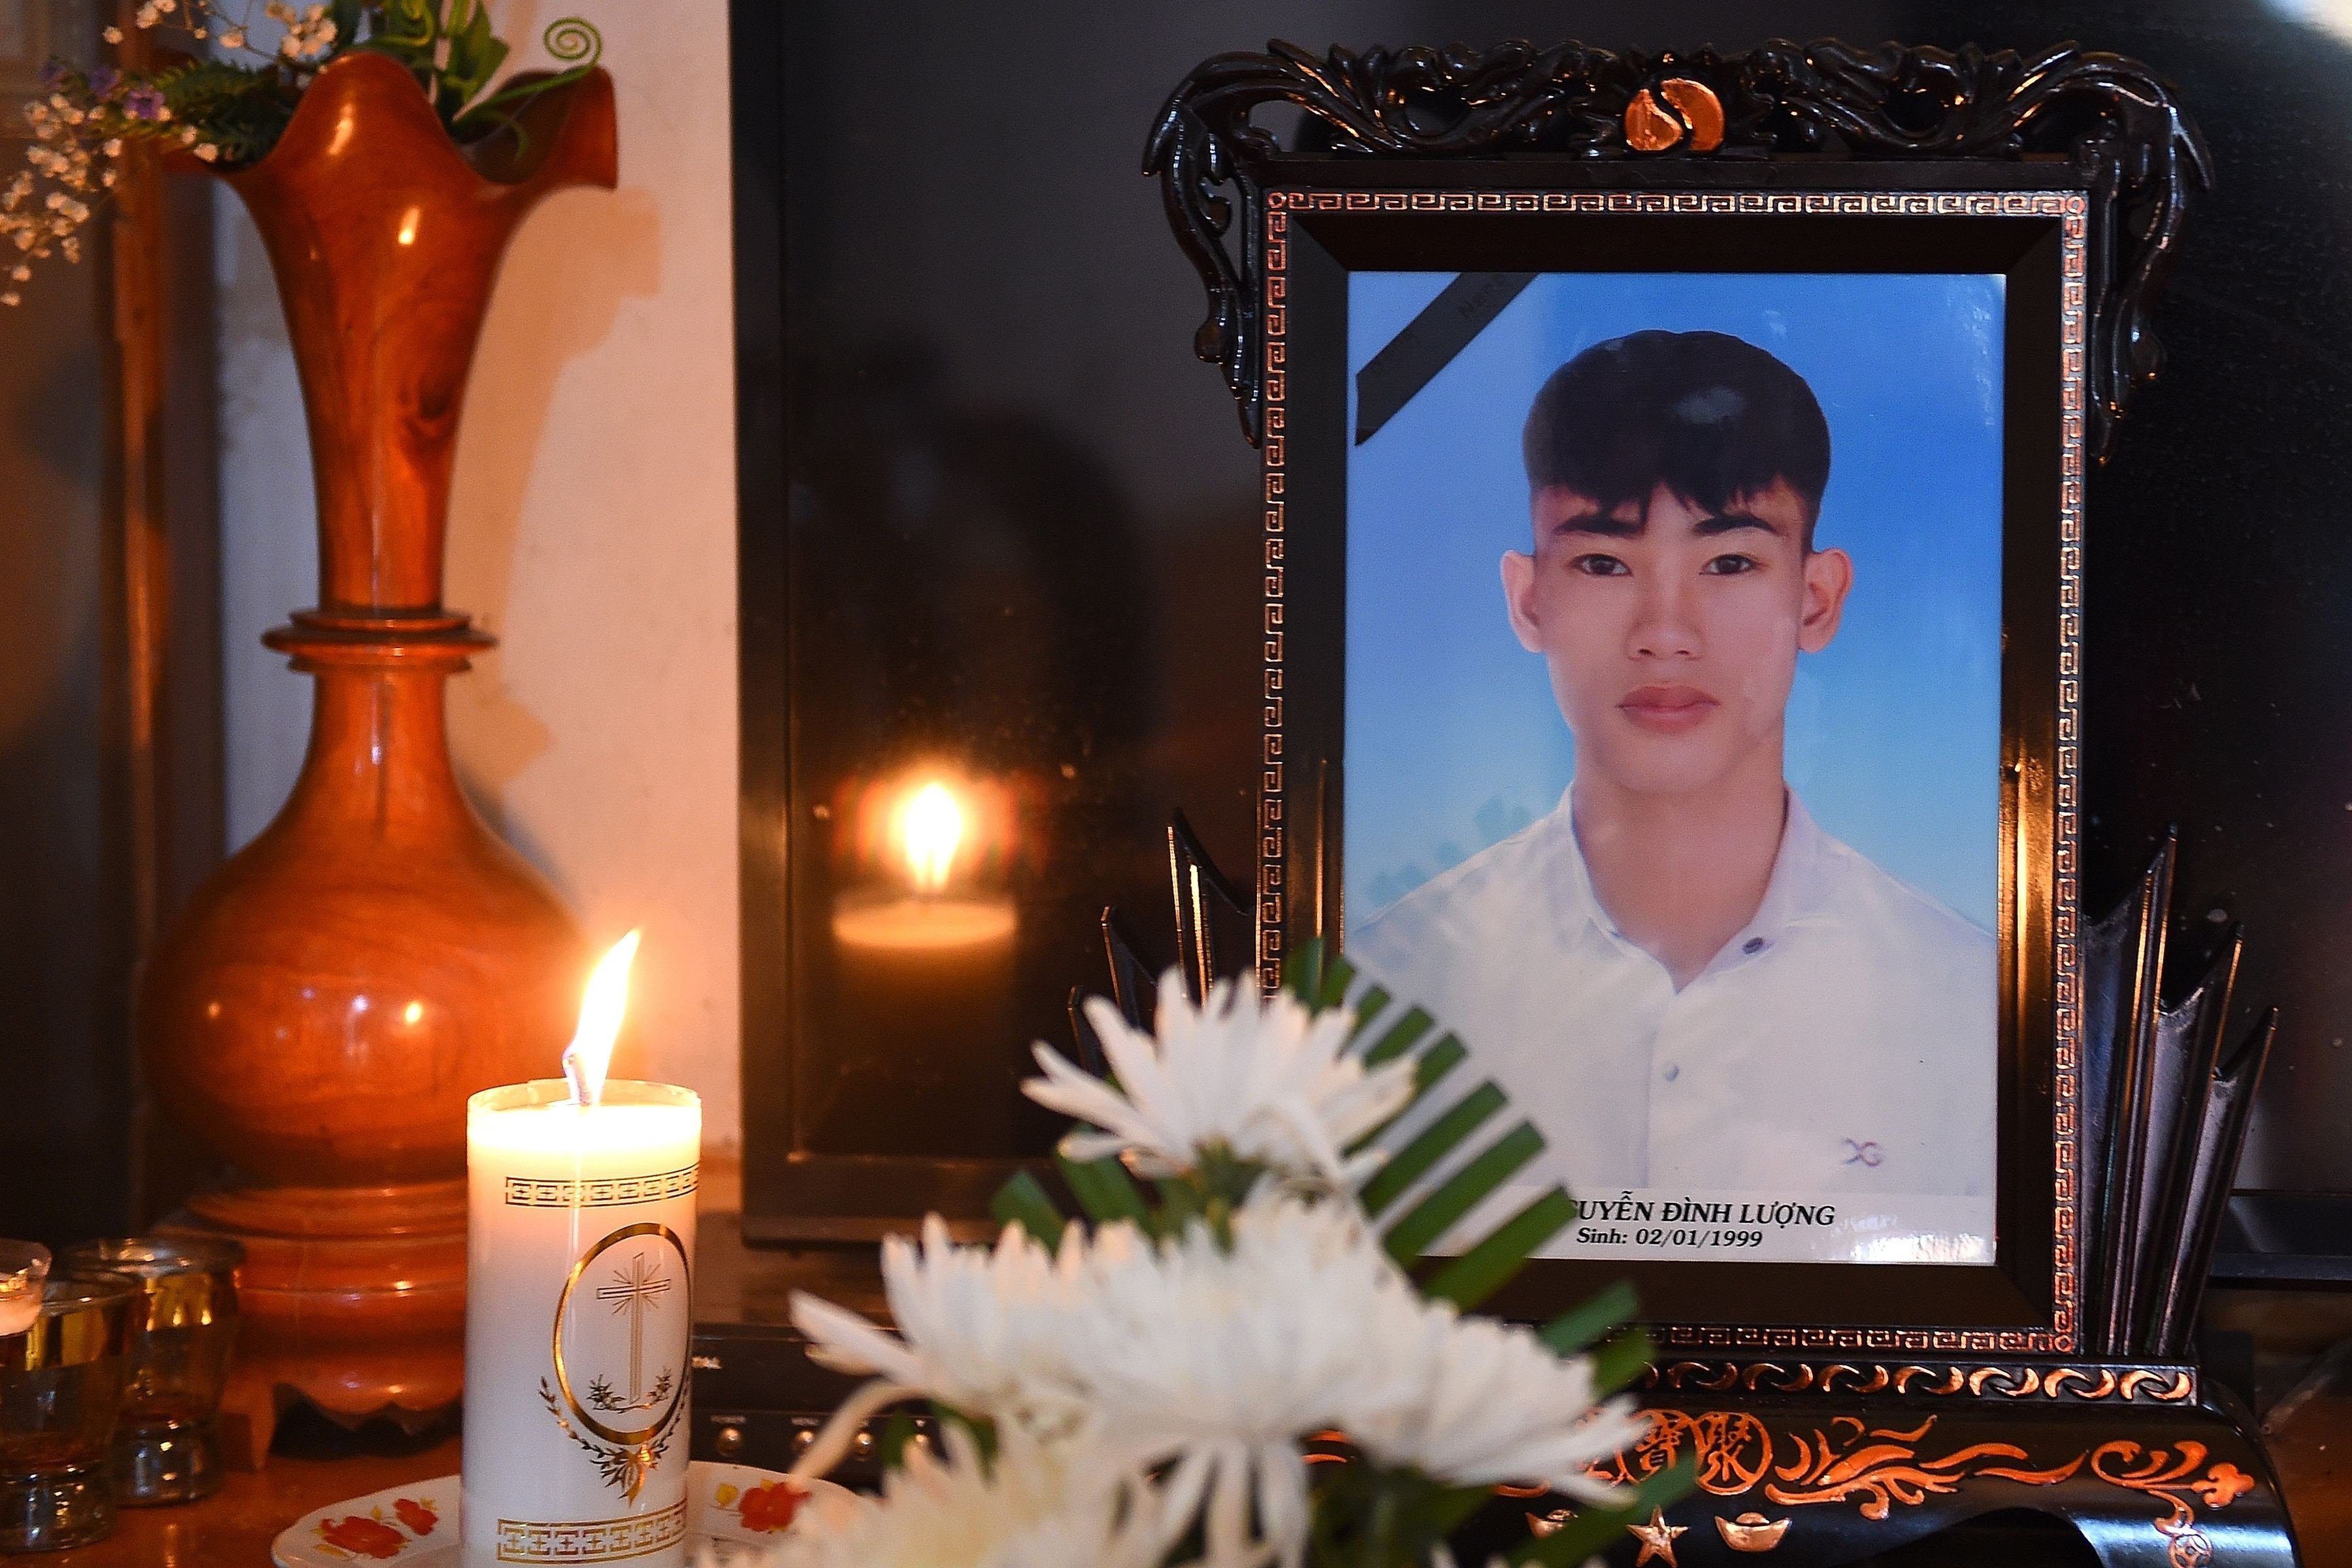 A portrait of 20-year-old Nguyen Dinh Luong, who is feared to be among the 39 people found dead in a truck in Britain, is kept on a prayer altar at his house in Vietnam's Ha Tinh province. Vietnamese police are cracking down on people smuggling. Photo: AFP